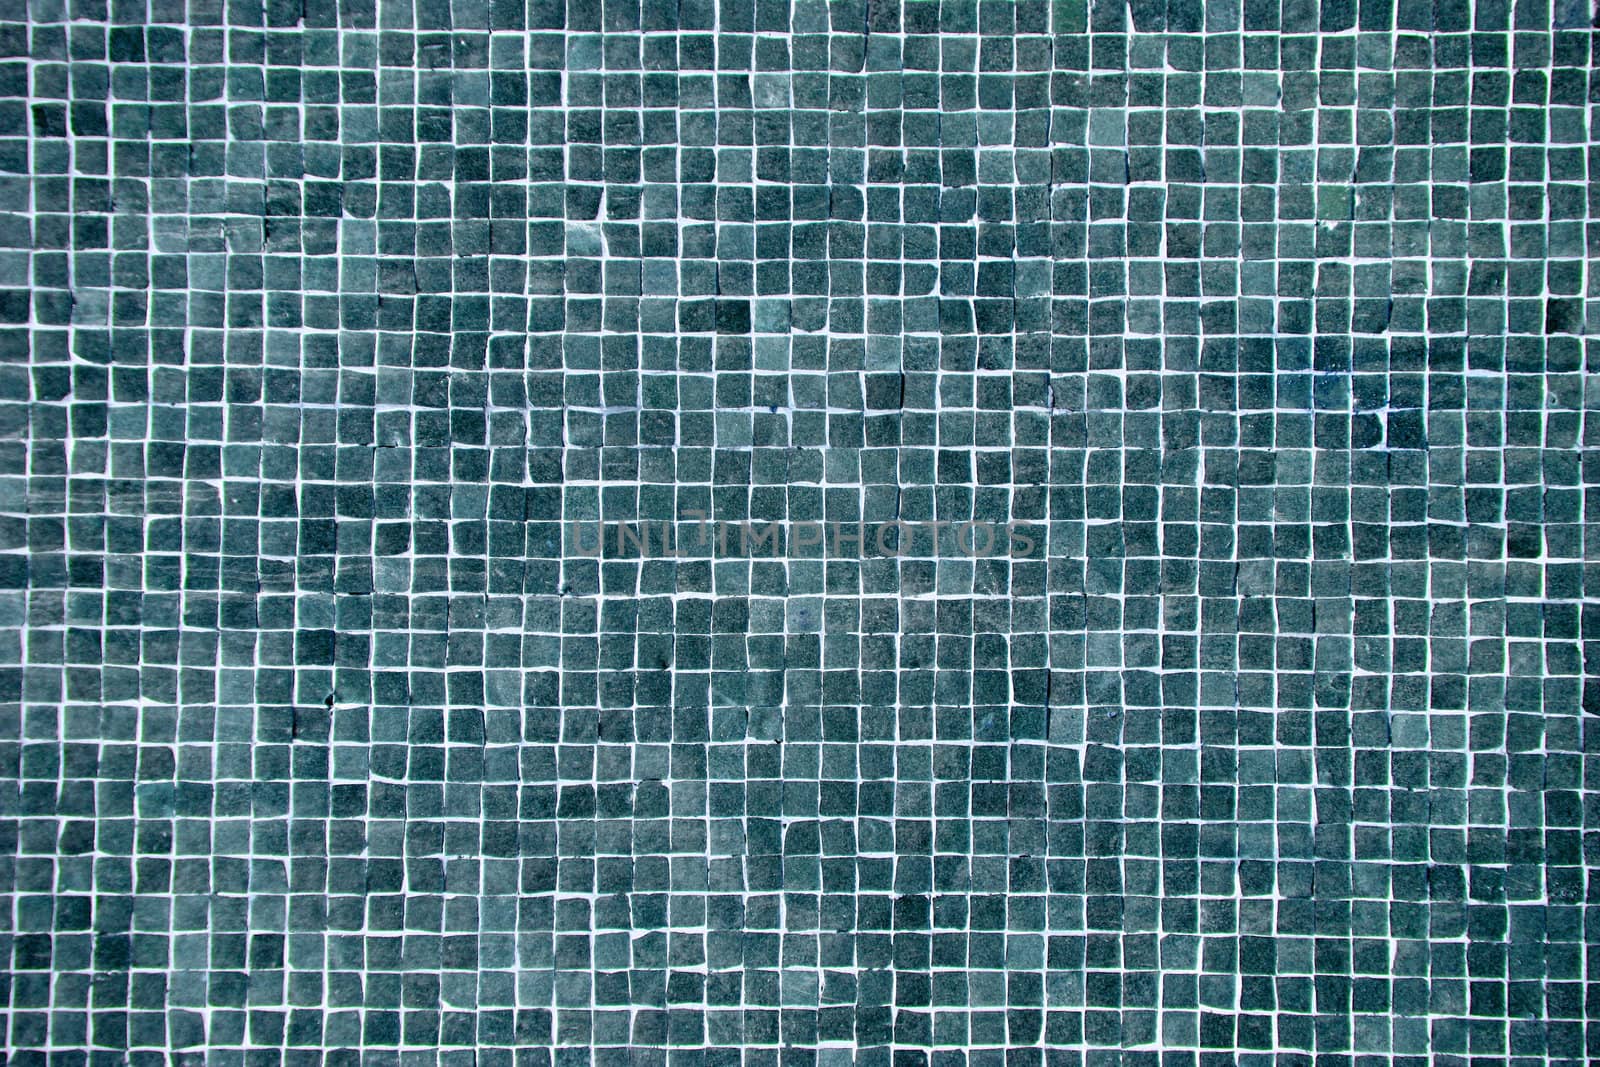 pattern, background or texture of a big blue mosaic